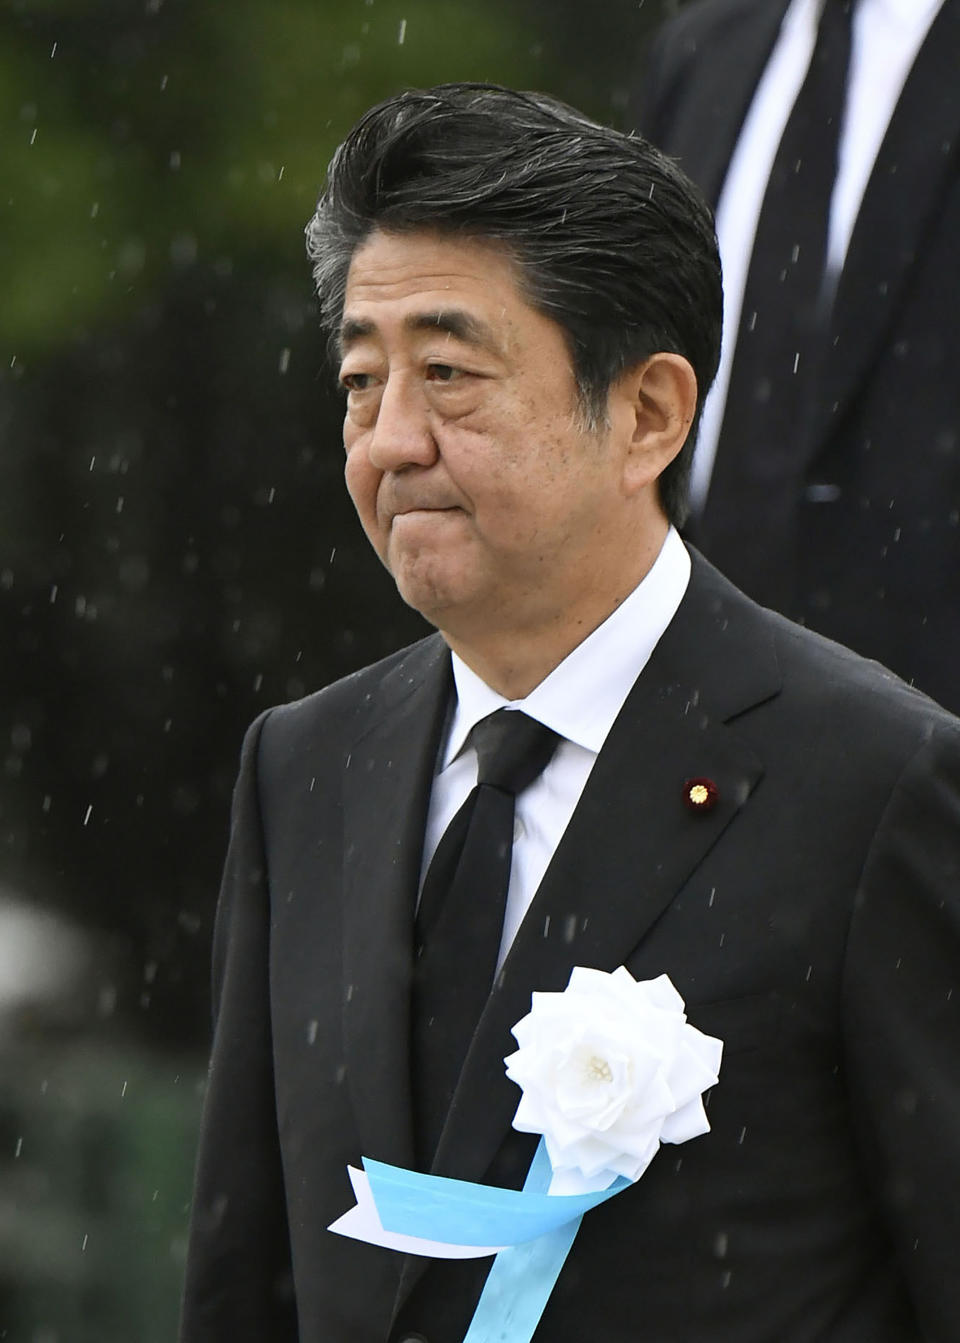 Japanese Prime Minister Shinzo Abe leaves after his speech during a ceremony to mark the 74th anniversary of the atomic bombing at the Hiroshima Peace Memorial Park in Hiroshima, western Japan Tuesday, Aug. 6, 2019. (Kyodo News via AP)